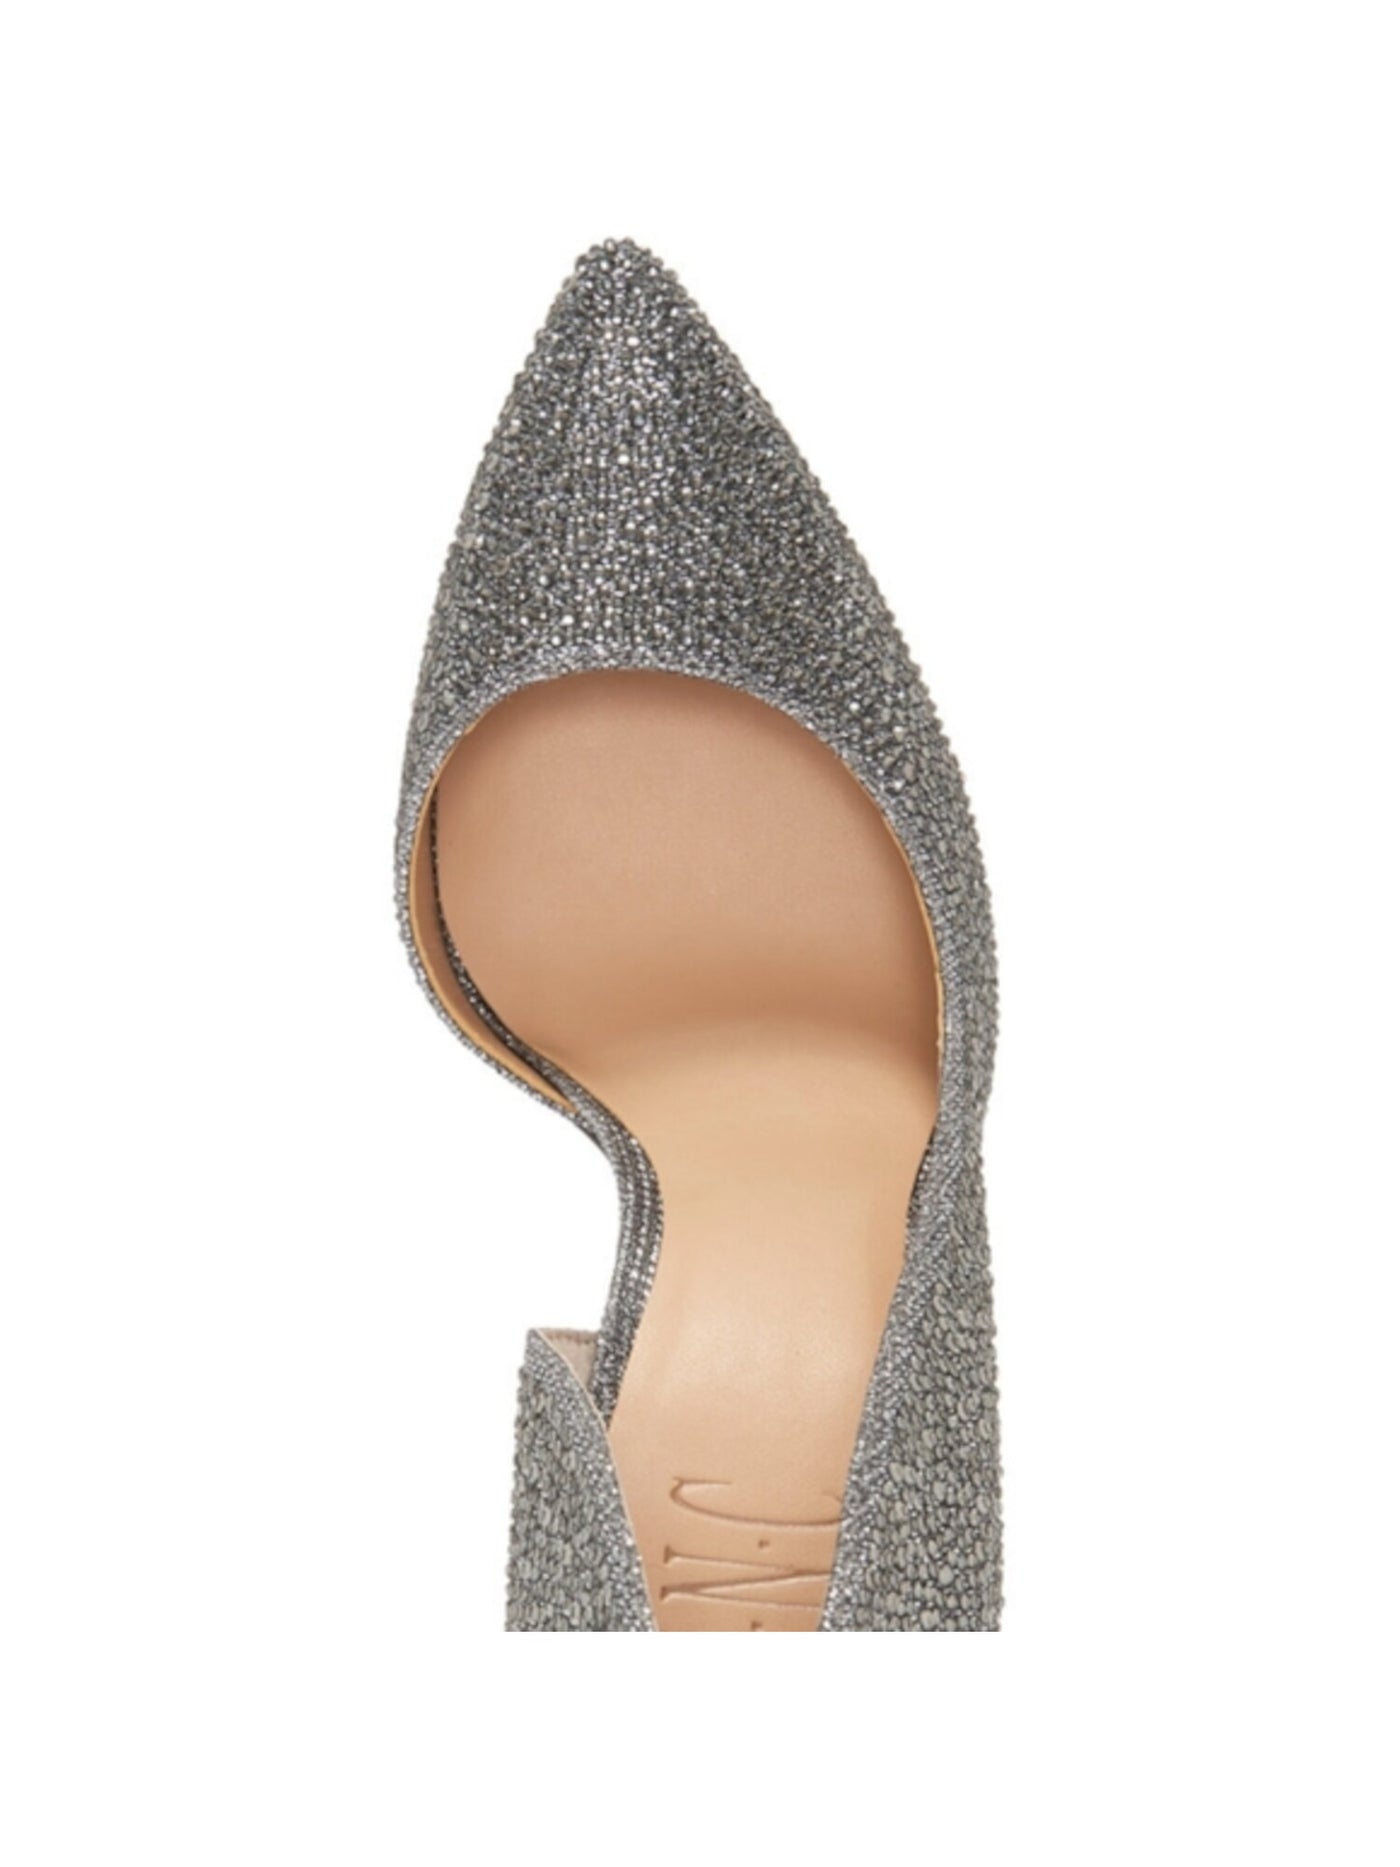 INC Womens Silver D'orsay Wrapped Heel Embellished Comfort Kenjay Stiletto Slip On Dress Pumps Shoes 9 M